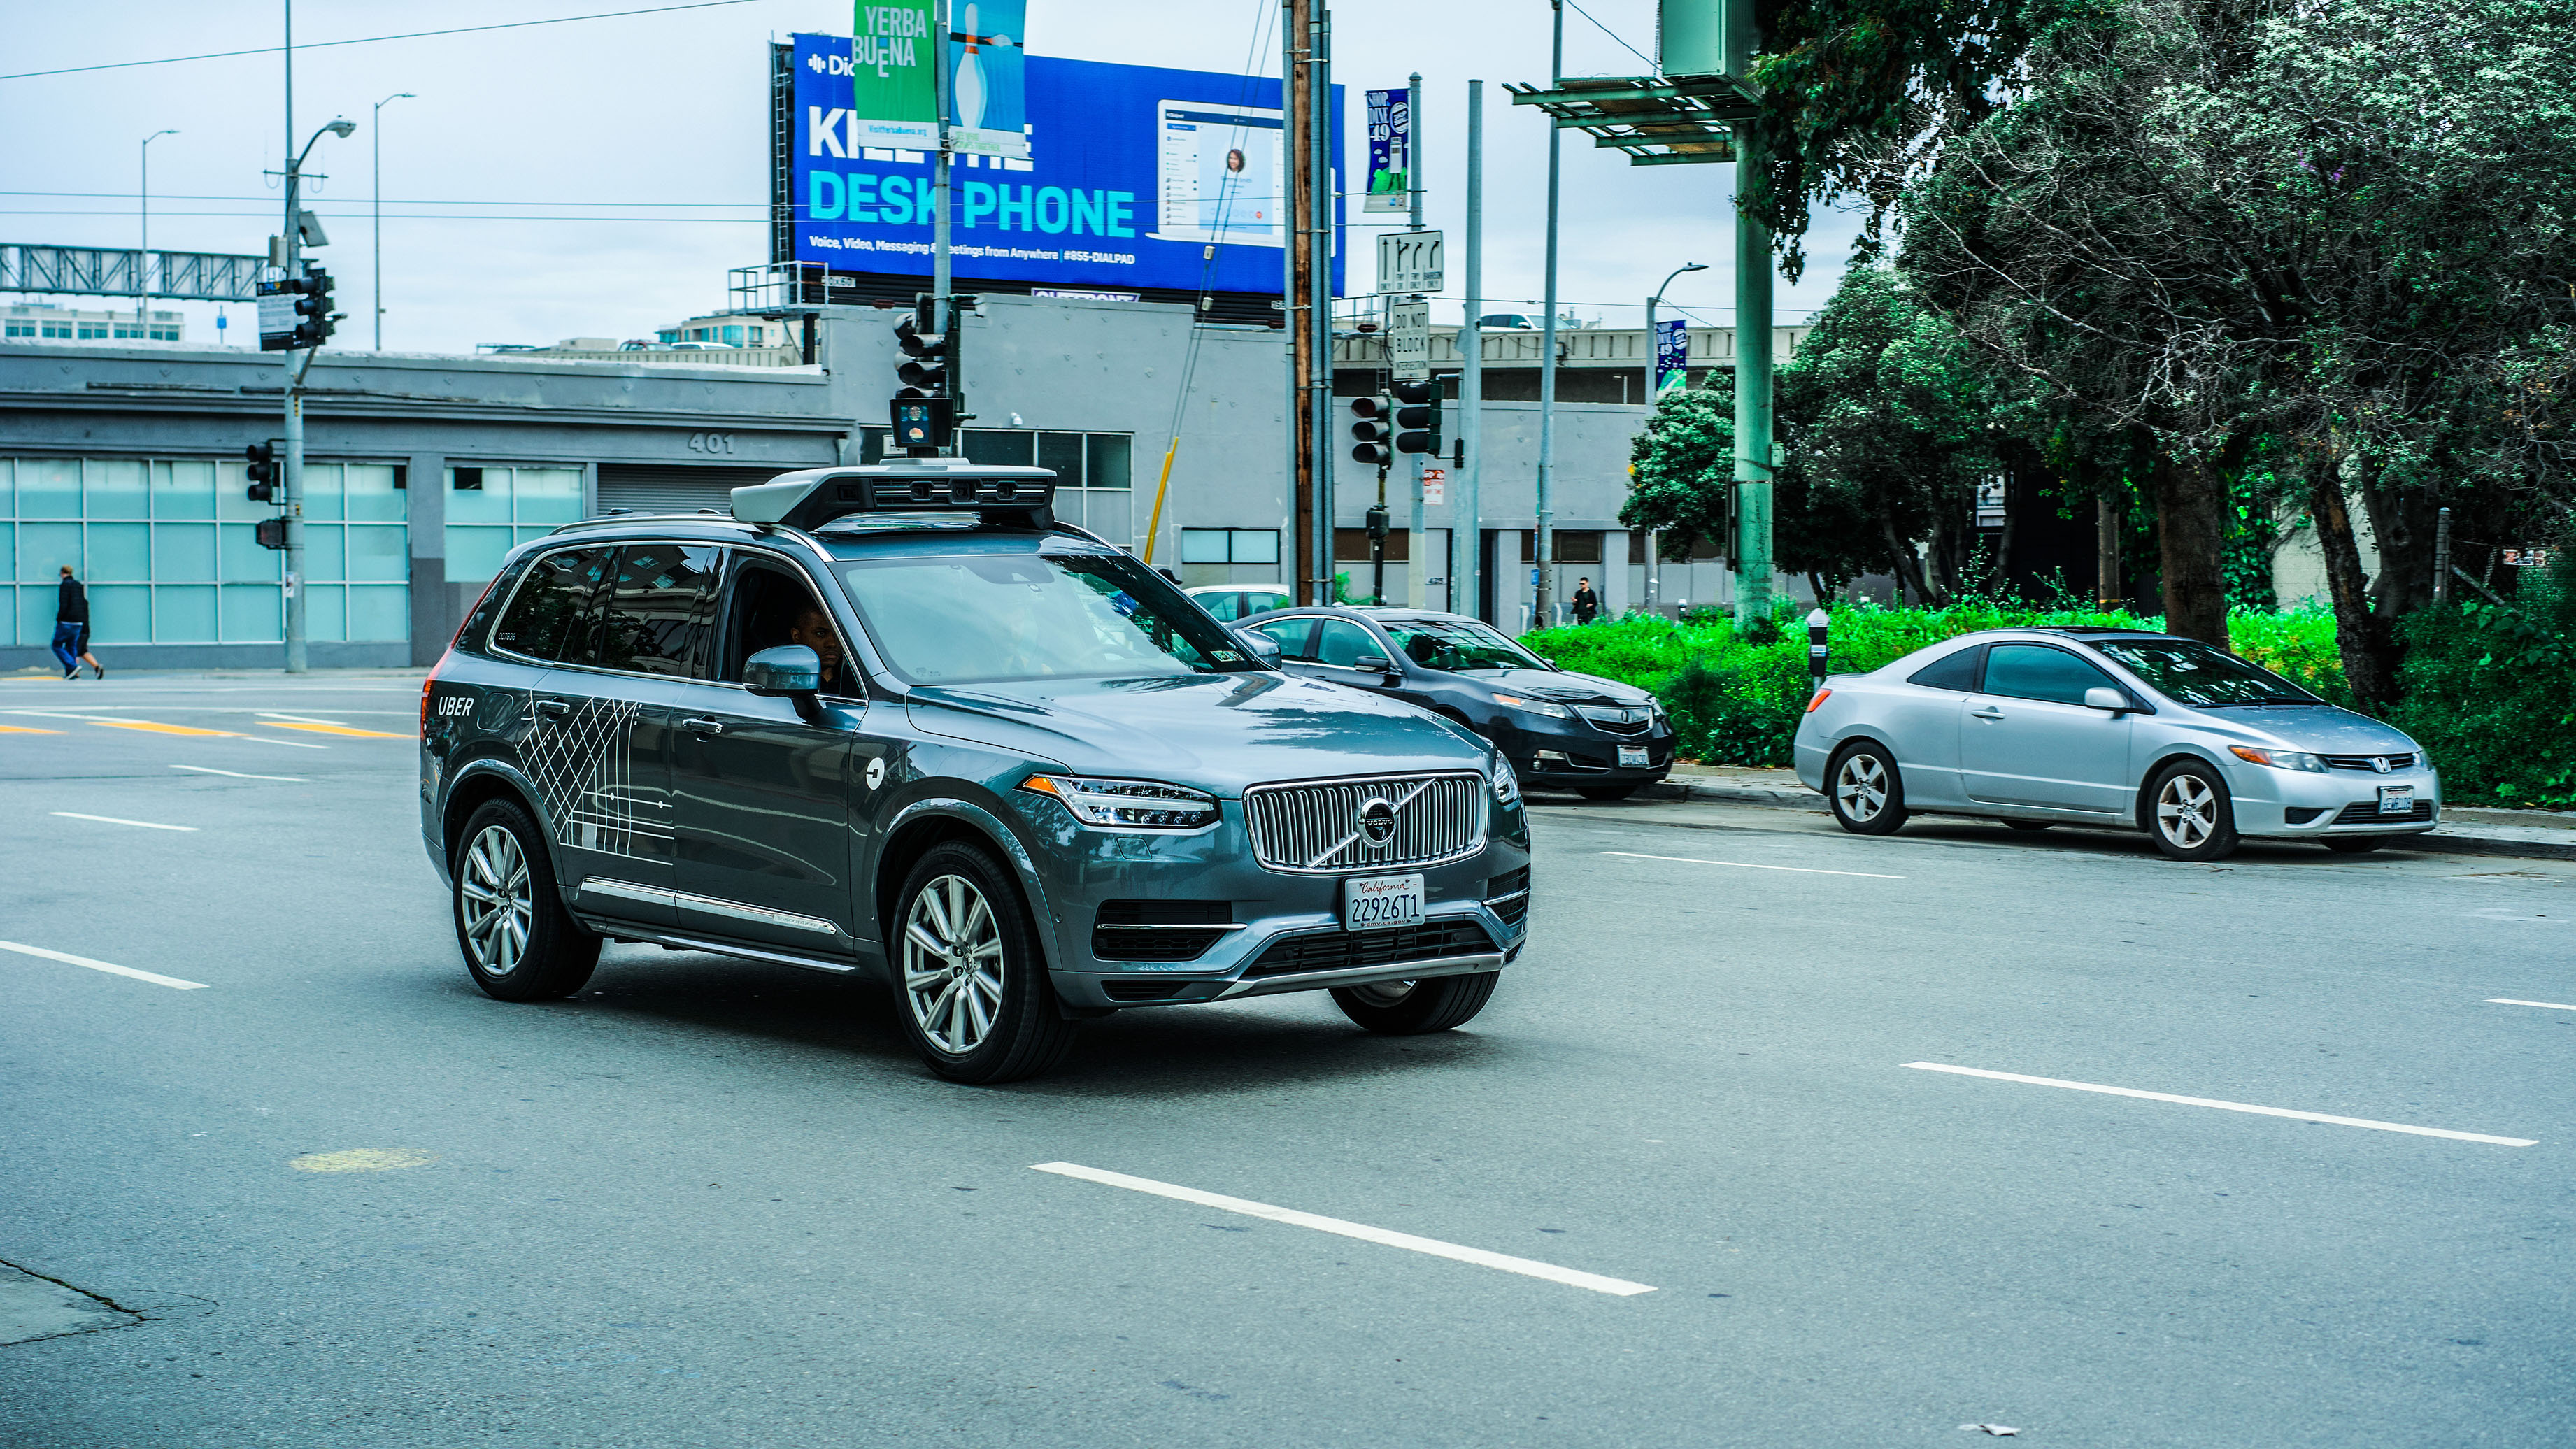 A self-driving Volvo SUV operated by Uber driving on the street.